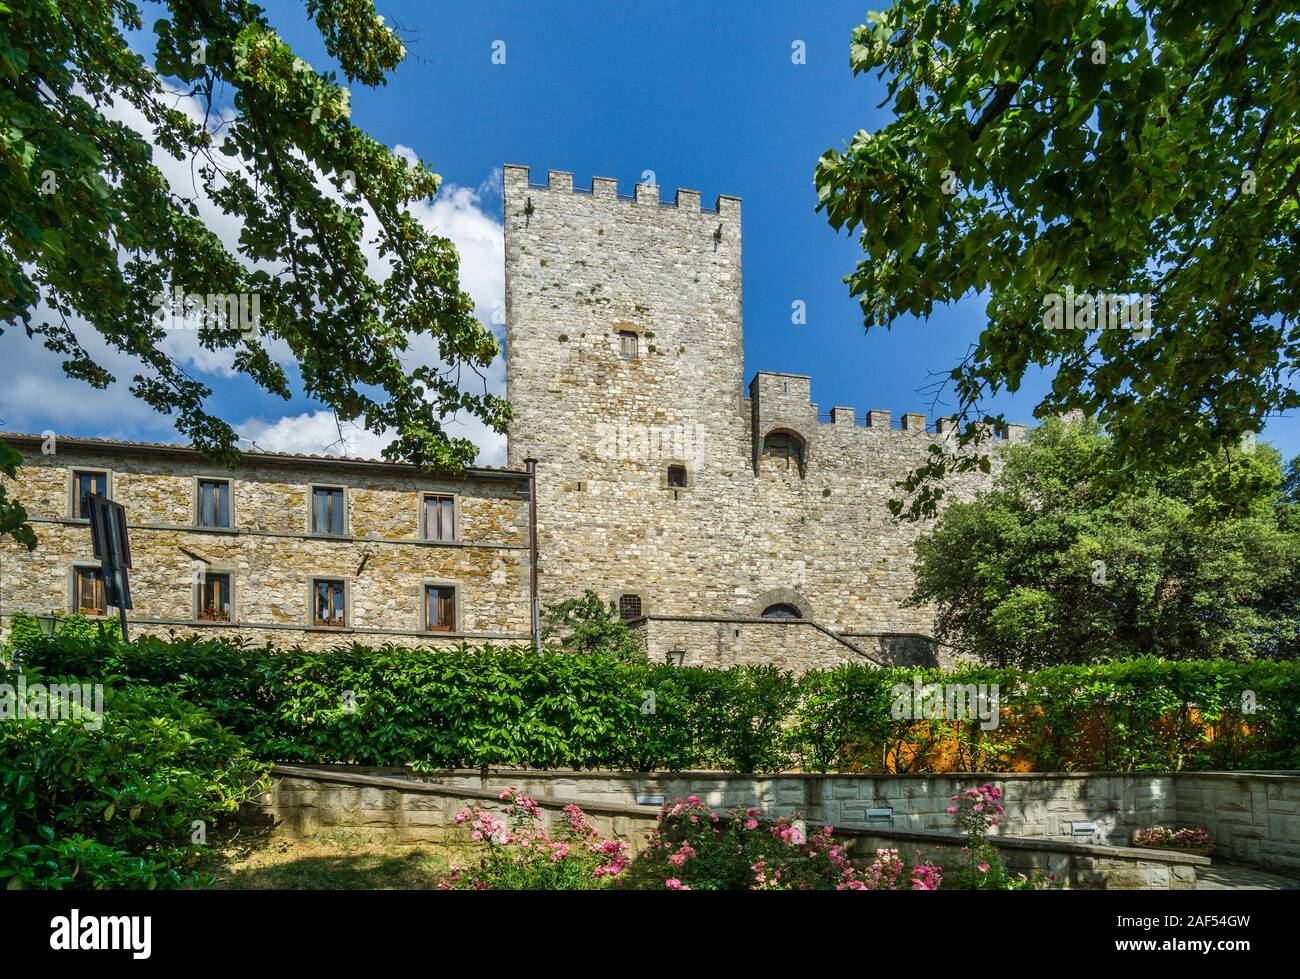 view of the restored 15th century Rocca of Castellina, the Fortress is now home to the Archaeological Museum of Sienese Chianti, Castellina in Chianti Stock Photo